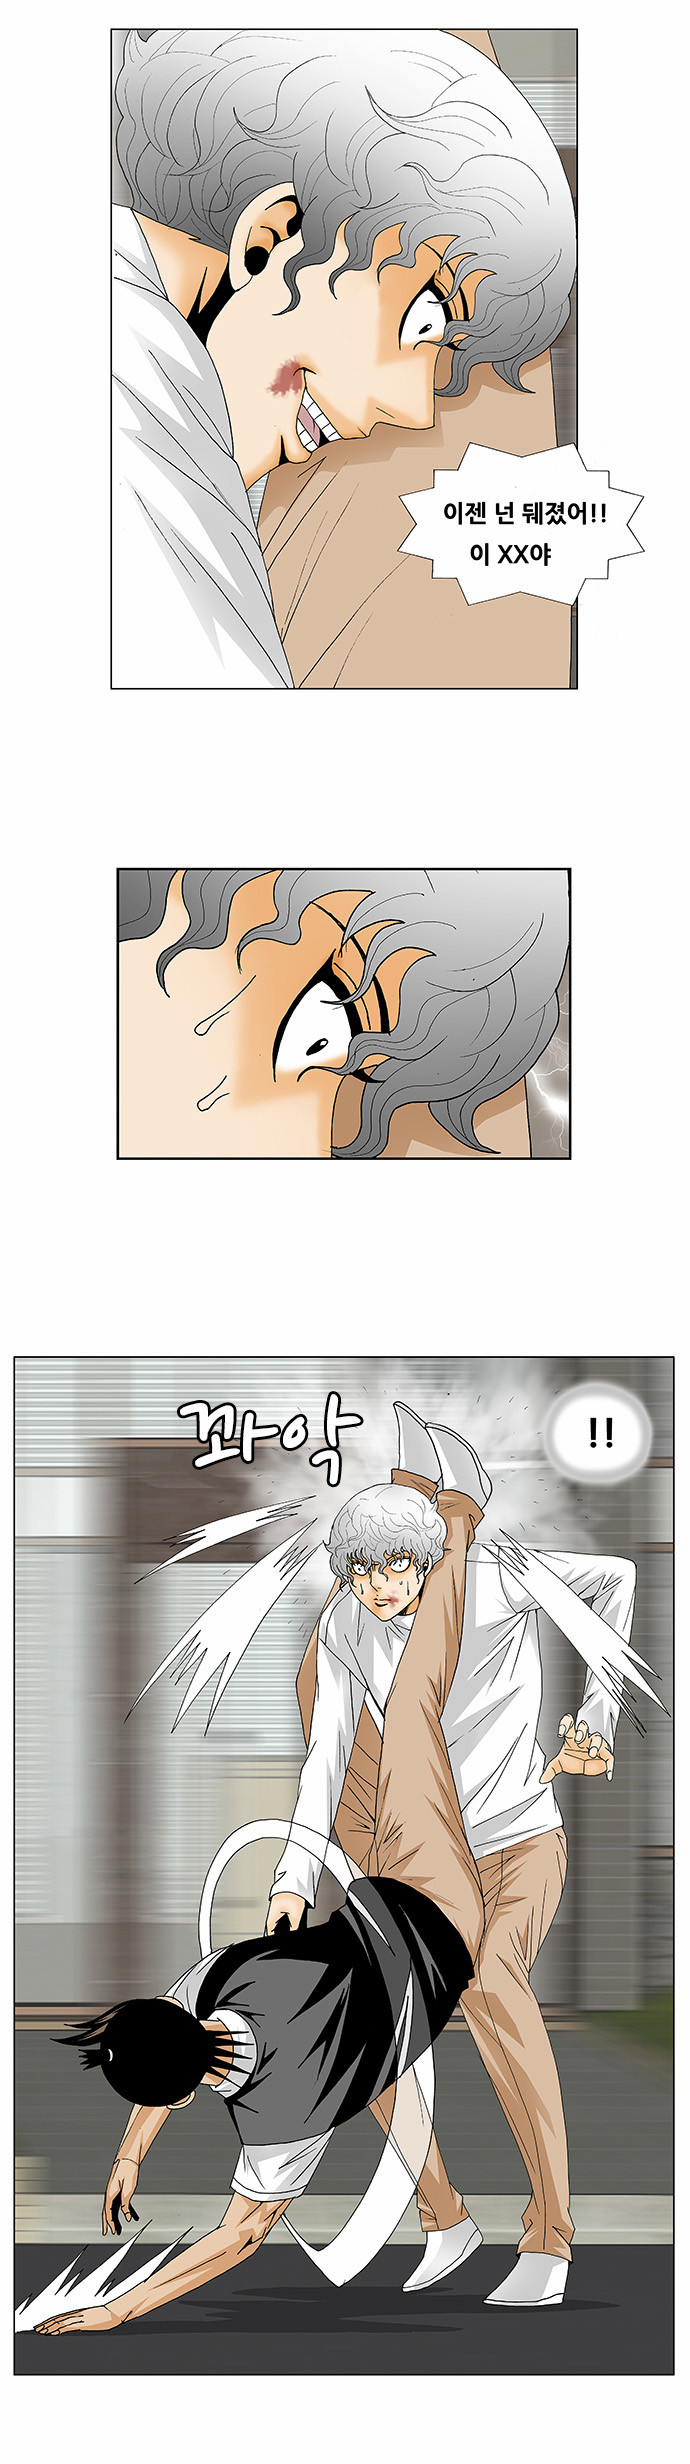 Ultimate Legend - Kang Hae Hyo - Chapter 129 - Page 5